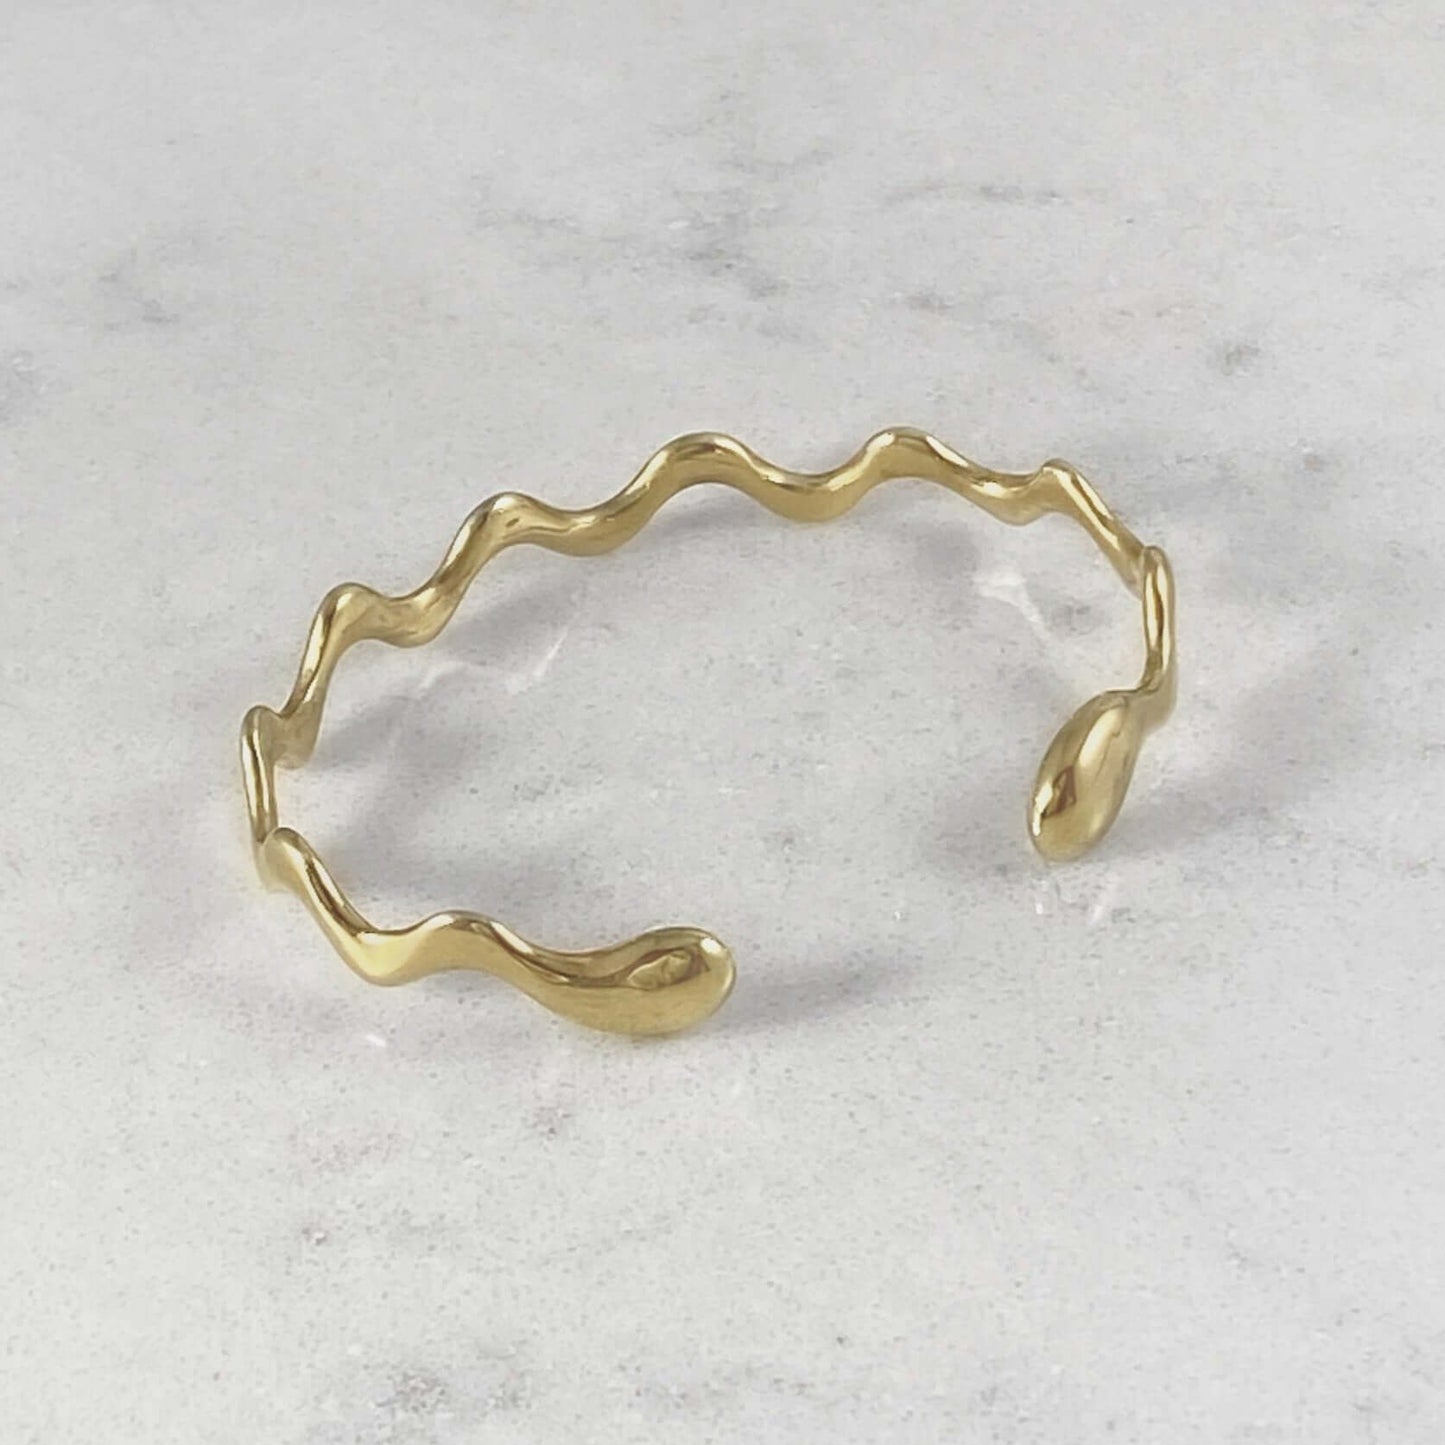 Product photo of a gold bracelet on a marble plate